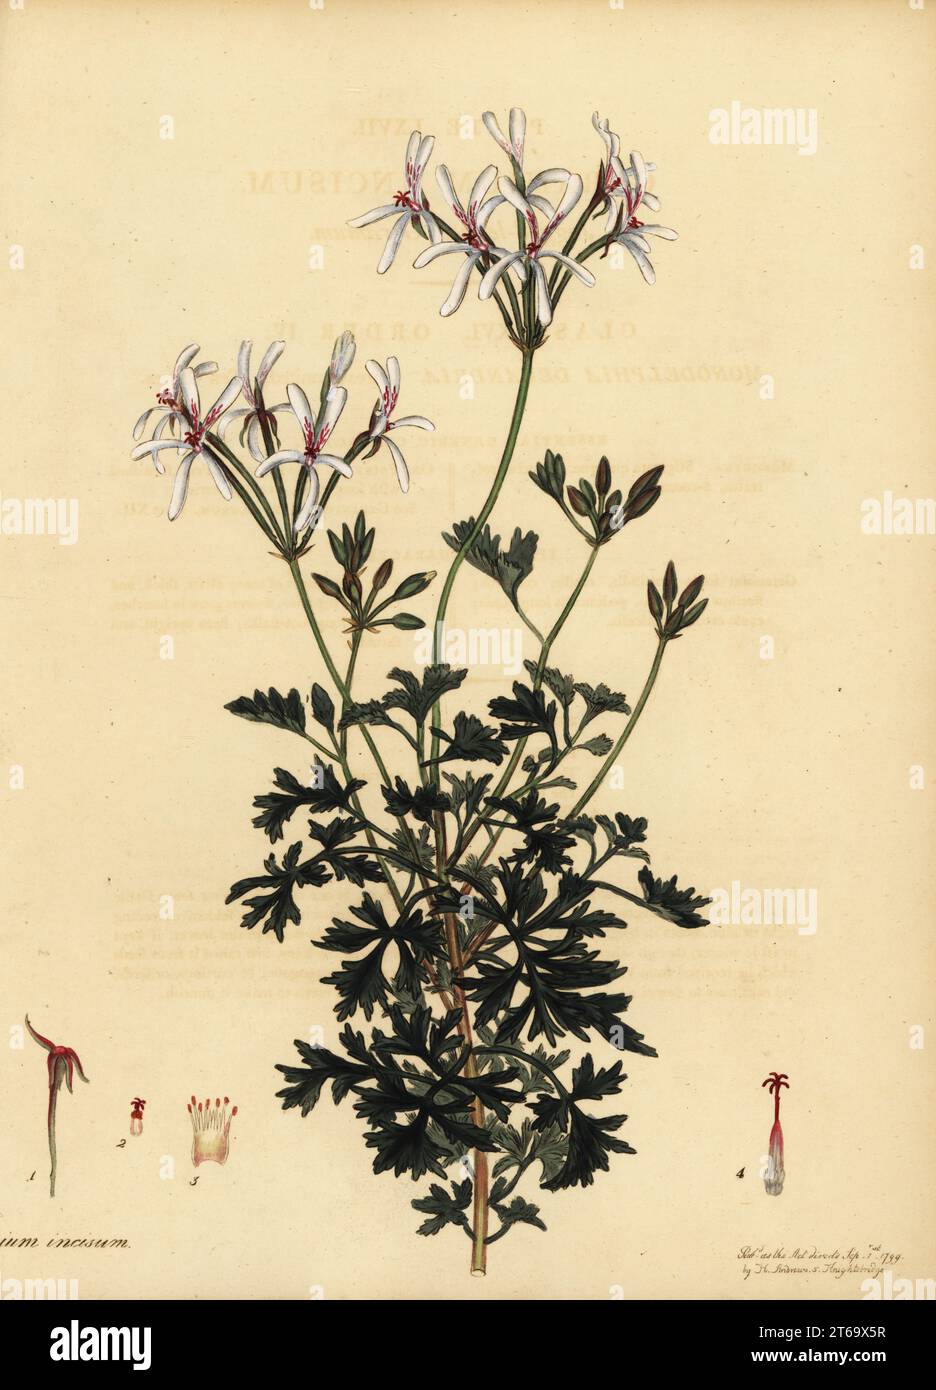 Oregon cranesbill, Geranium oreganum. Western North America from California to Alberta. Jagged-leaved geranium, Geranium incisum. Copperplate engraving drawn, engraved and hand-coloured by Henry Andrews from his Botanical Register, Volume 1, published in London, 1799. Stock Photo